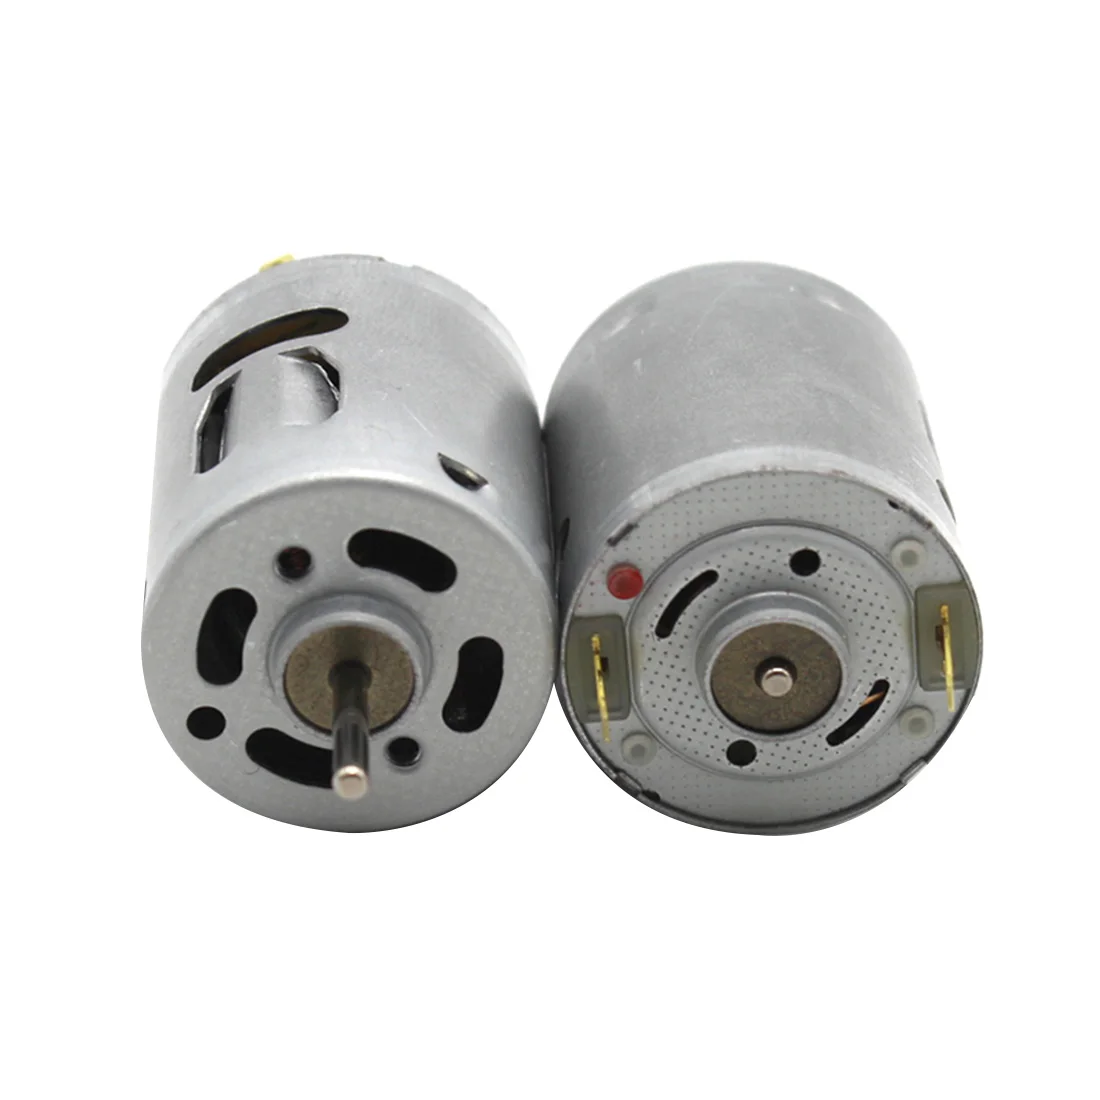 1PCS DC6V 113RPM High Torque DC Gear Motor with Gearbox For DIY Toy JGA13-050 